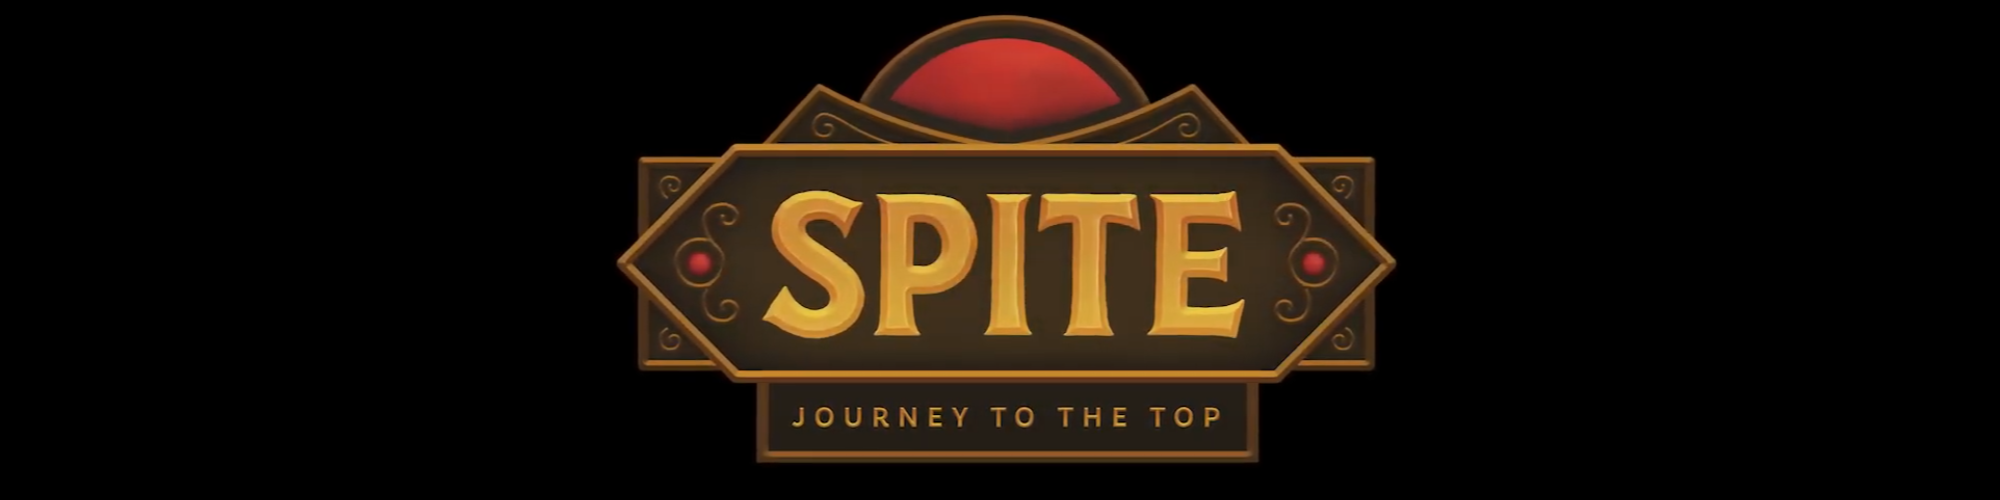 Spite: Journey To The Top